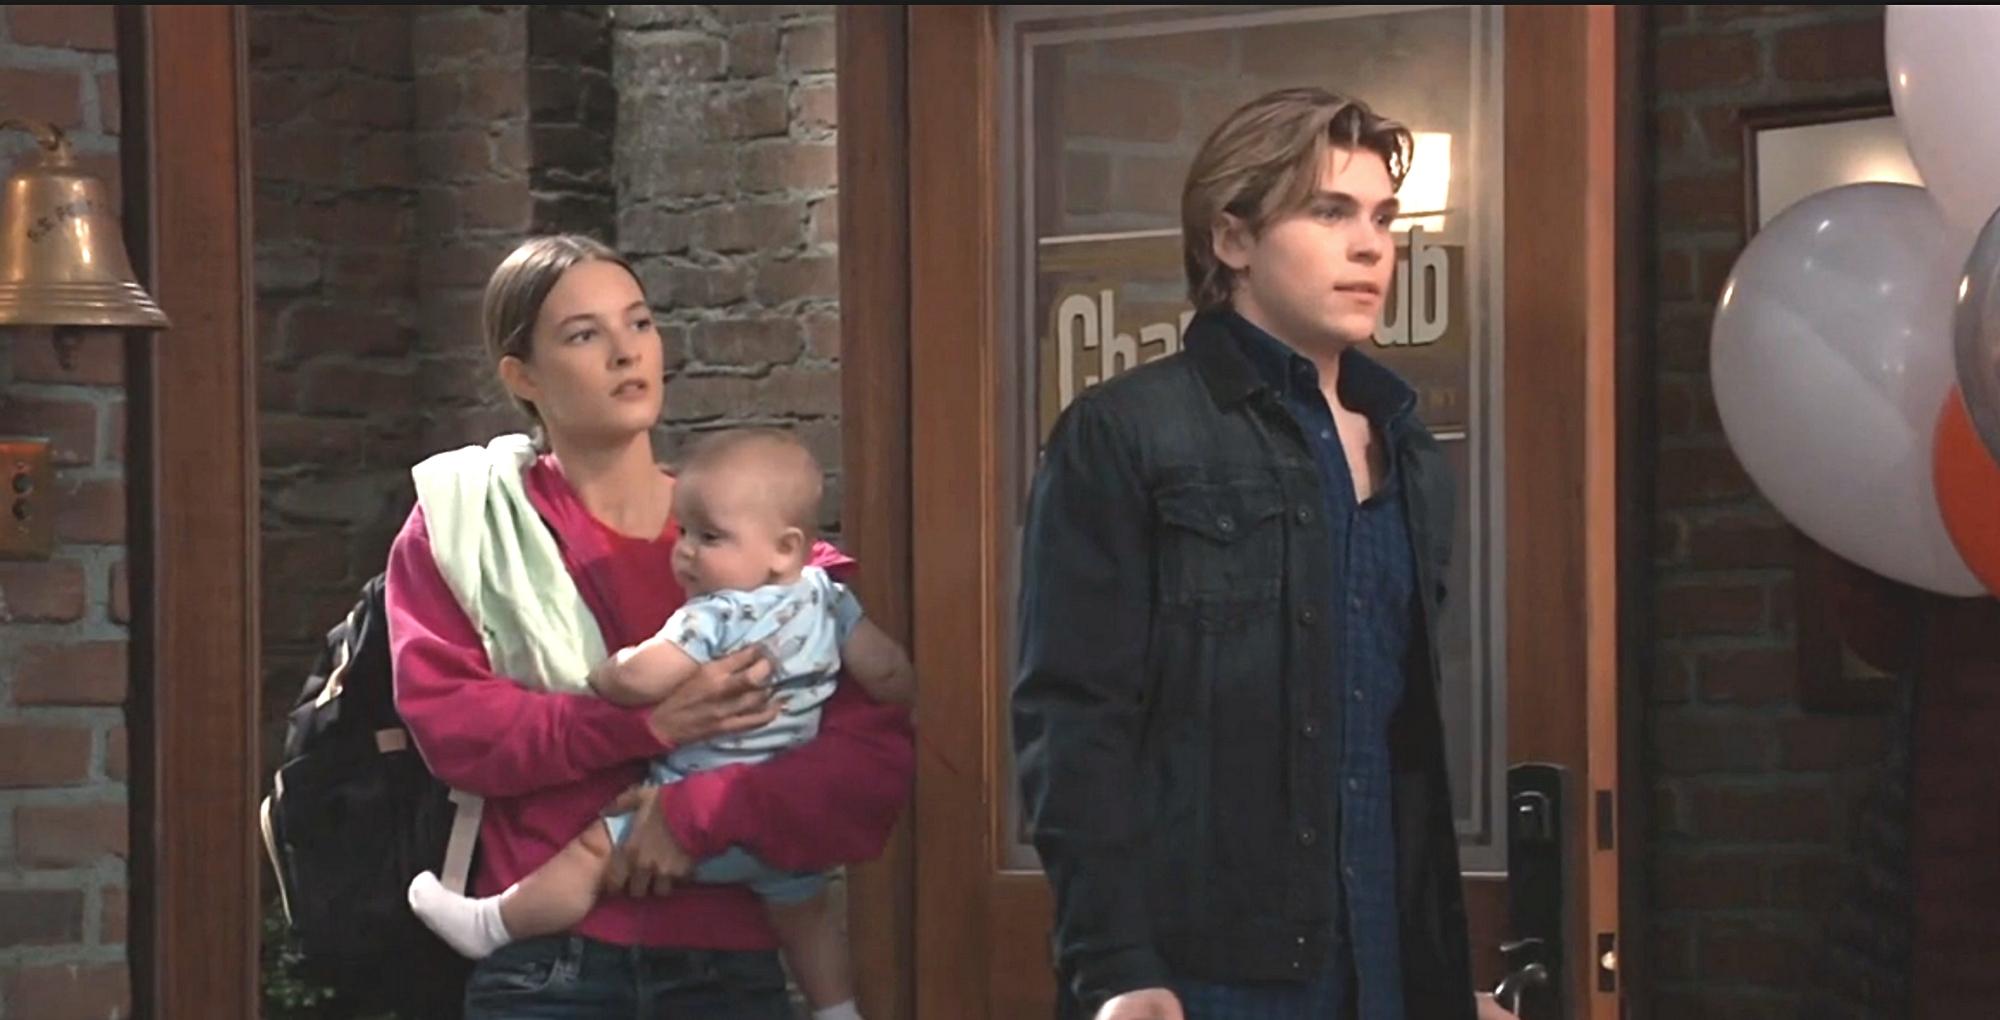 the general hospital recap for march 27, 2023, has cameron webber bringing esme to his party